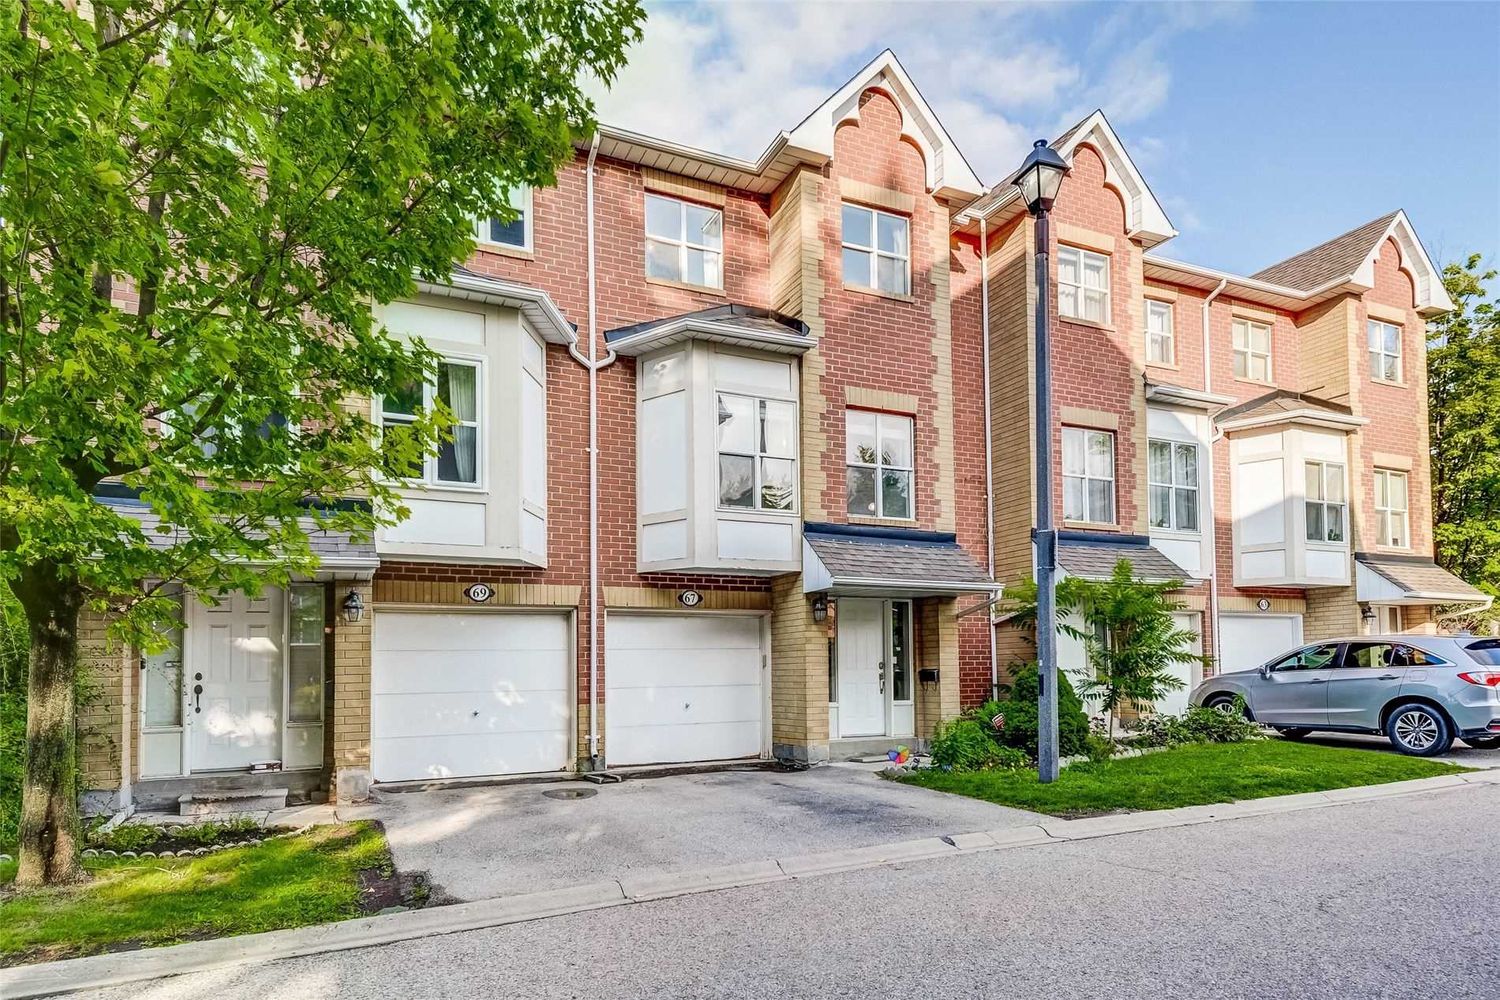 1-150 Maple Park Way. Maple Park Way Townhomes is located in  Markham, Toronto - image #2 of 3